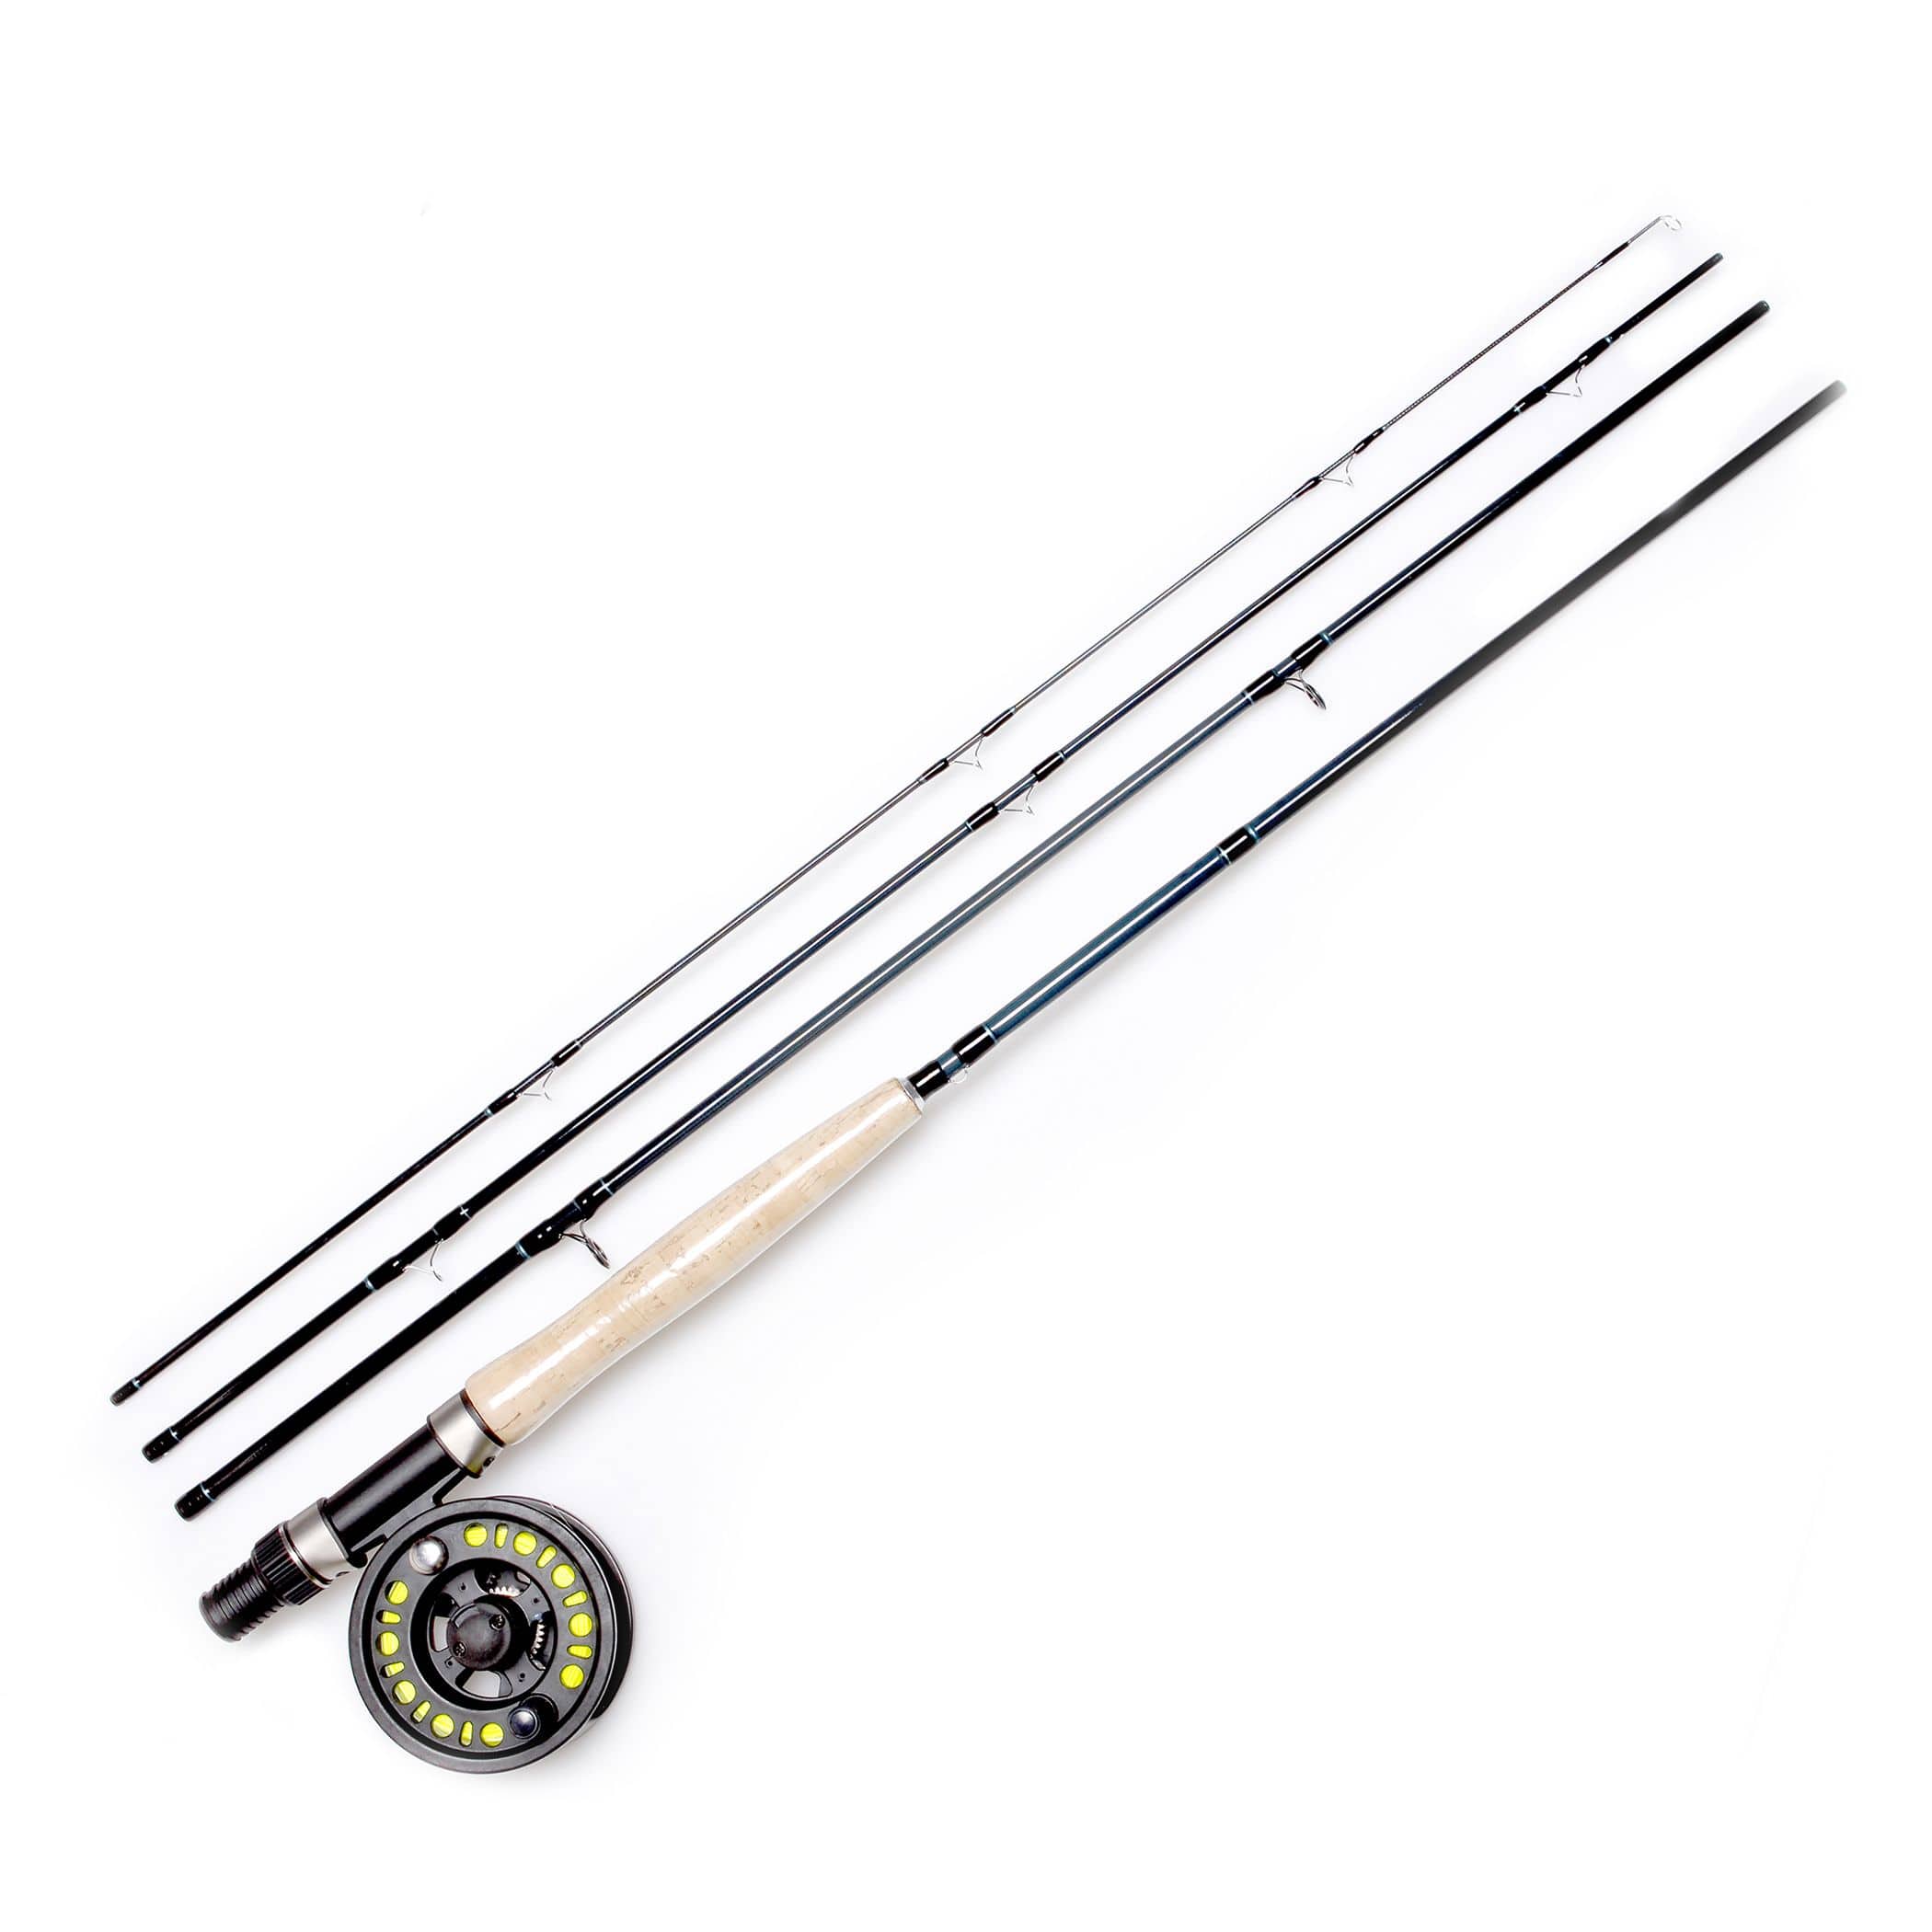 Premium Fly Fishing Rod & Reel Combo - Best Performance and Value